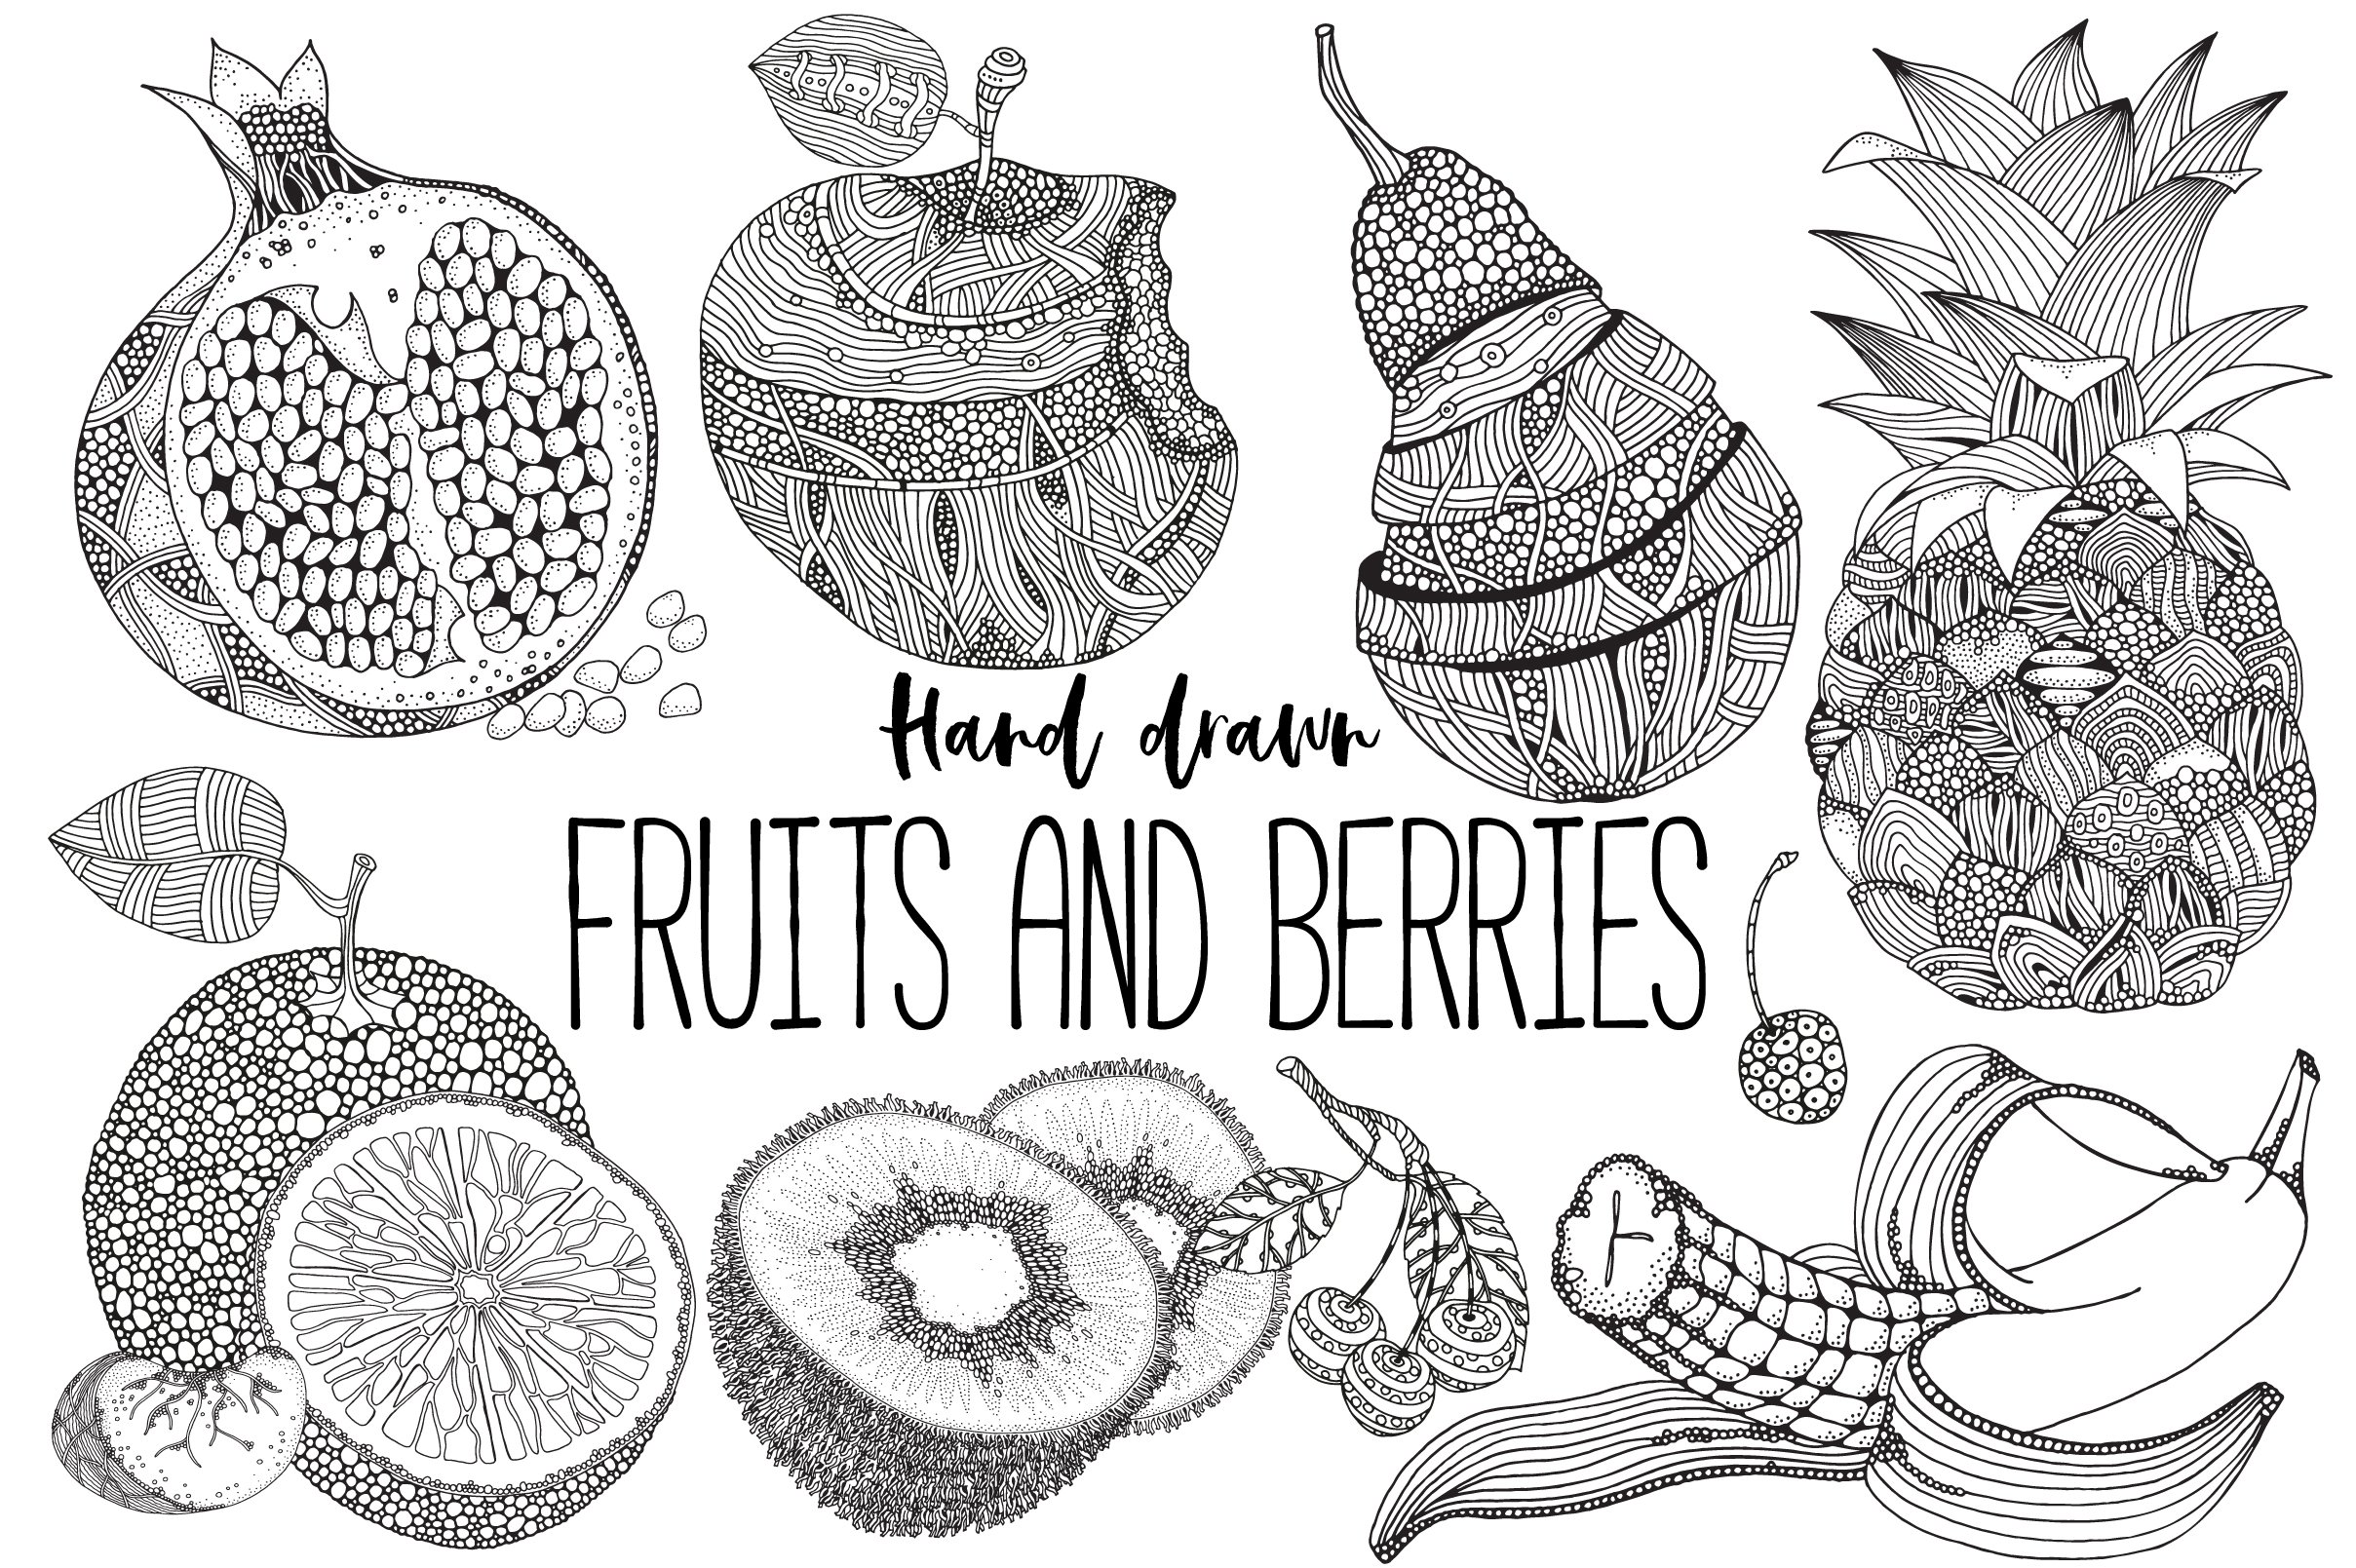 Fruits and berries - hand drawn set cover image.